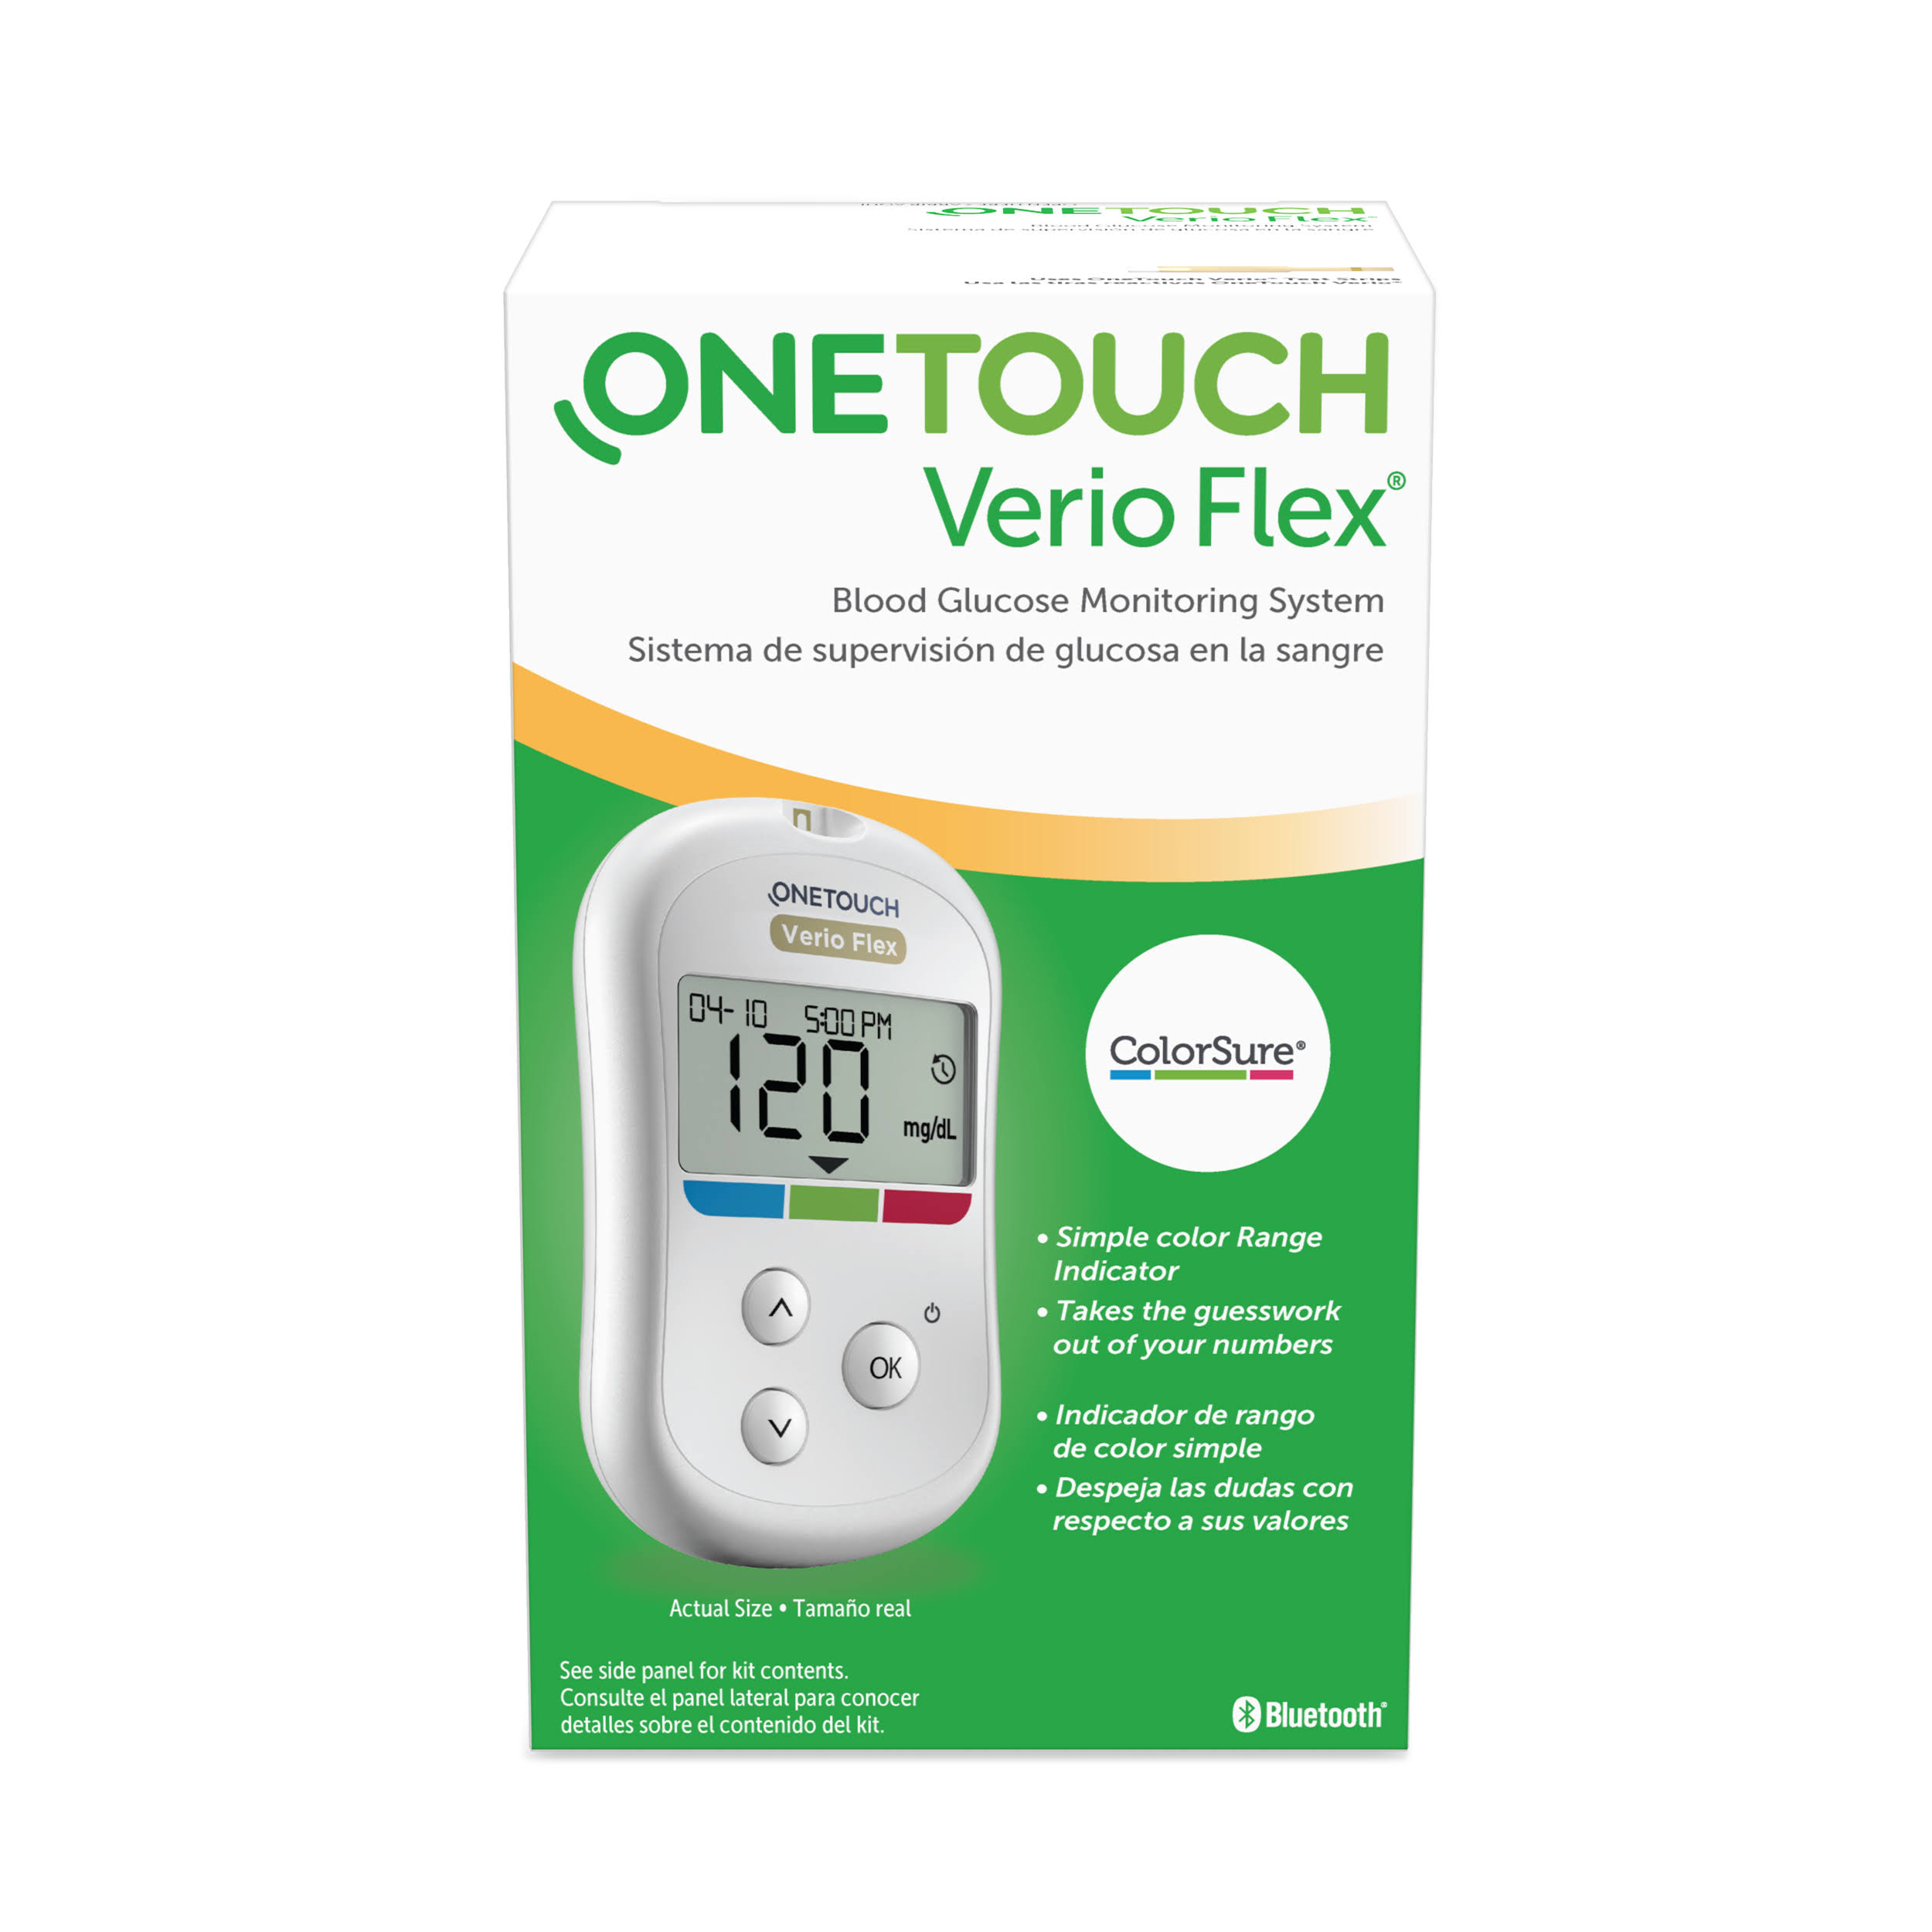 Onetouch Verio Flex Blood Glucose Monitoring System